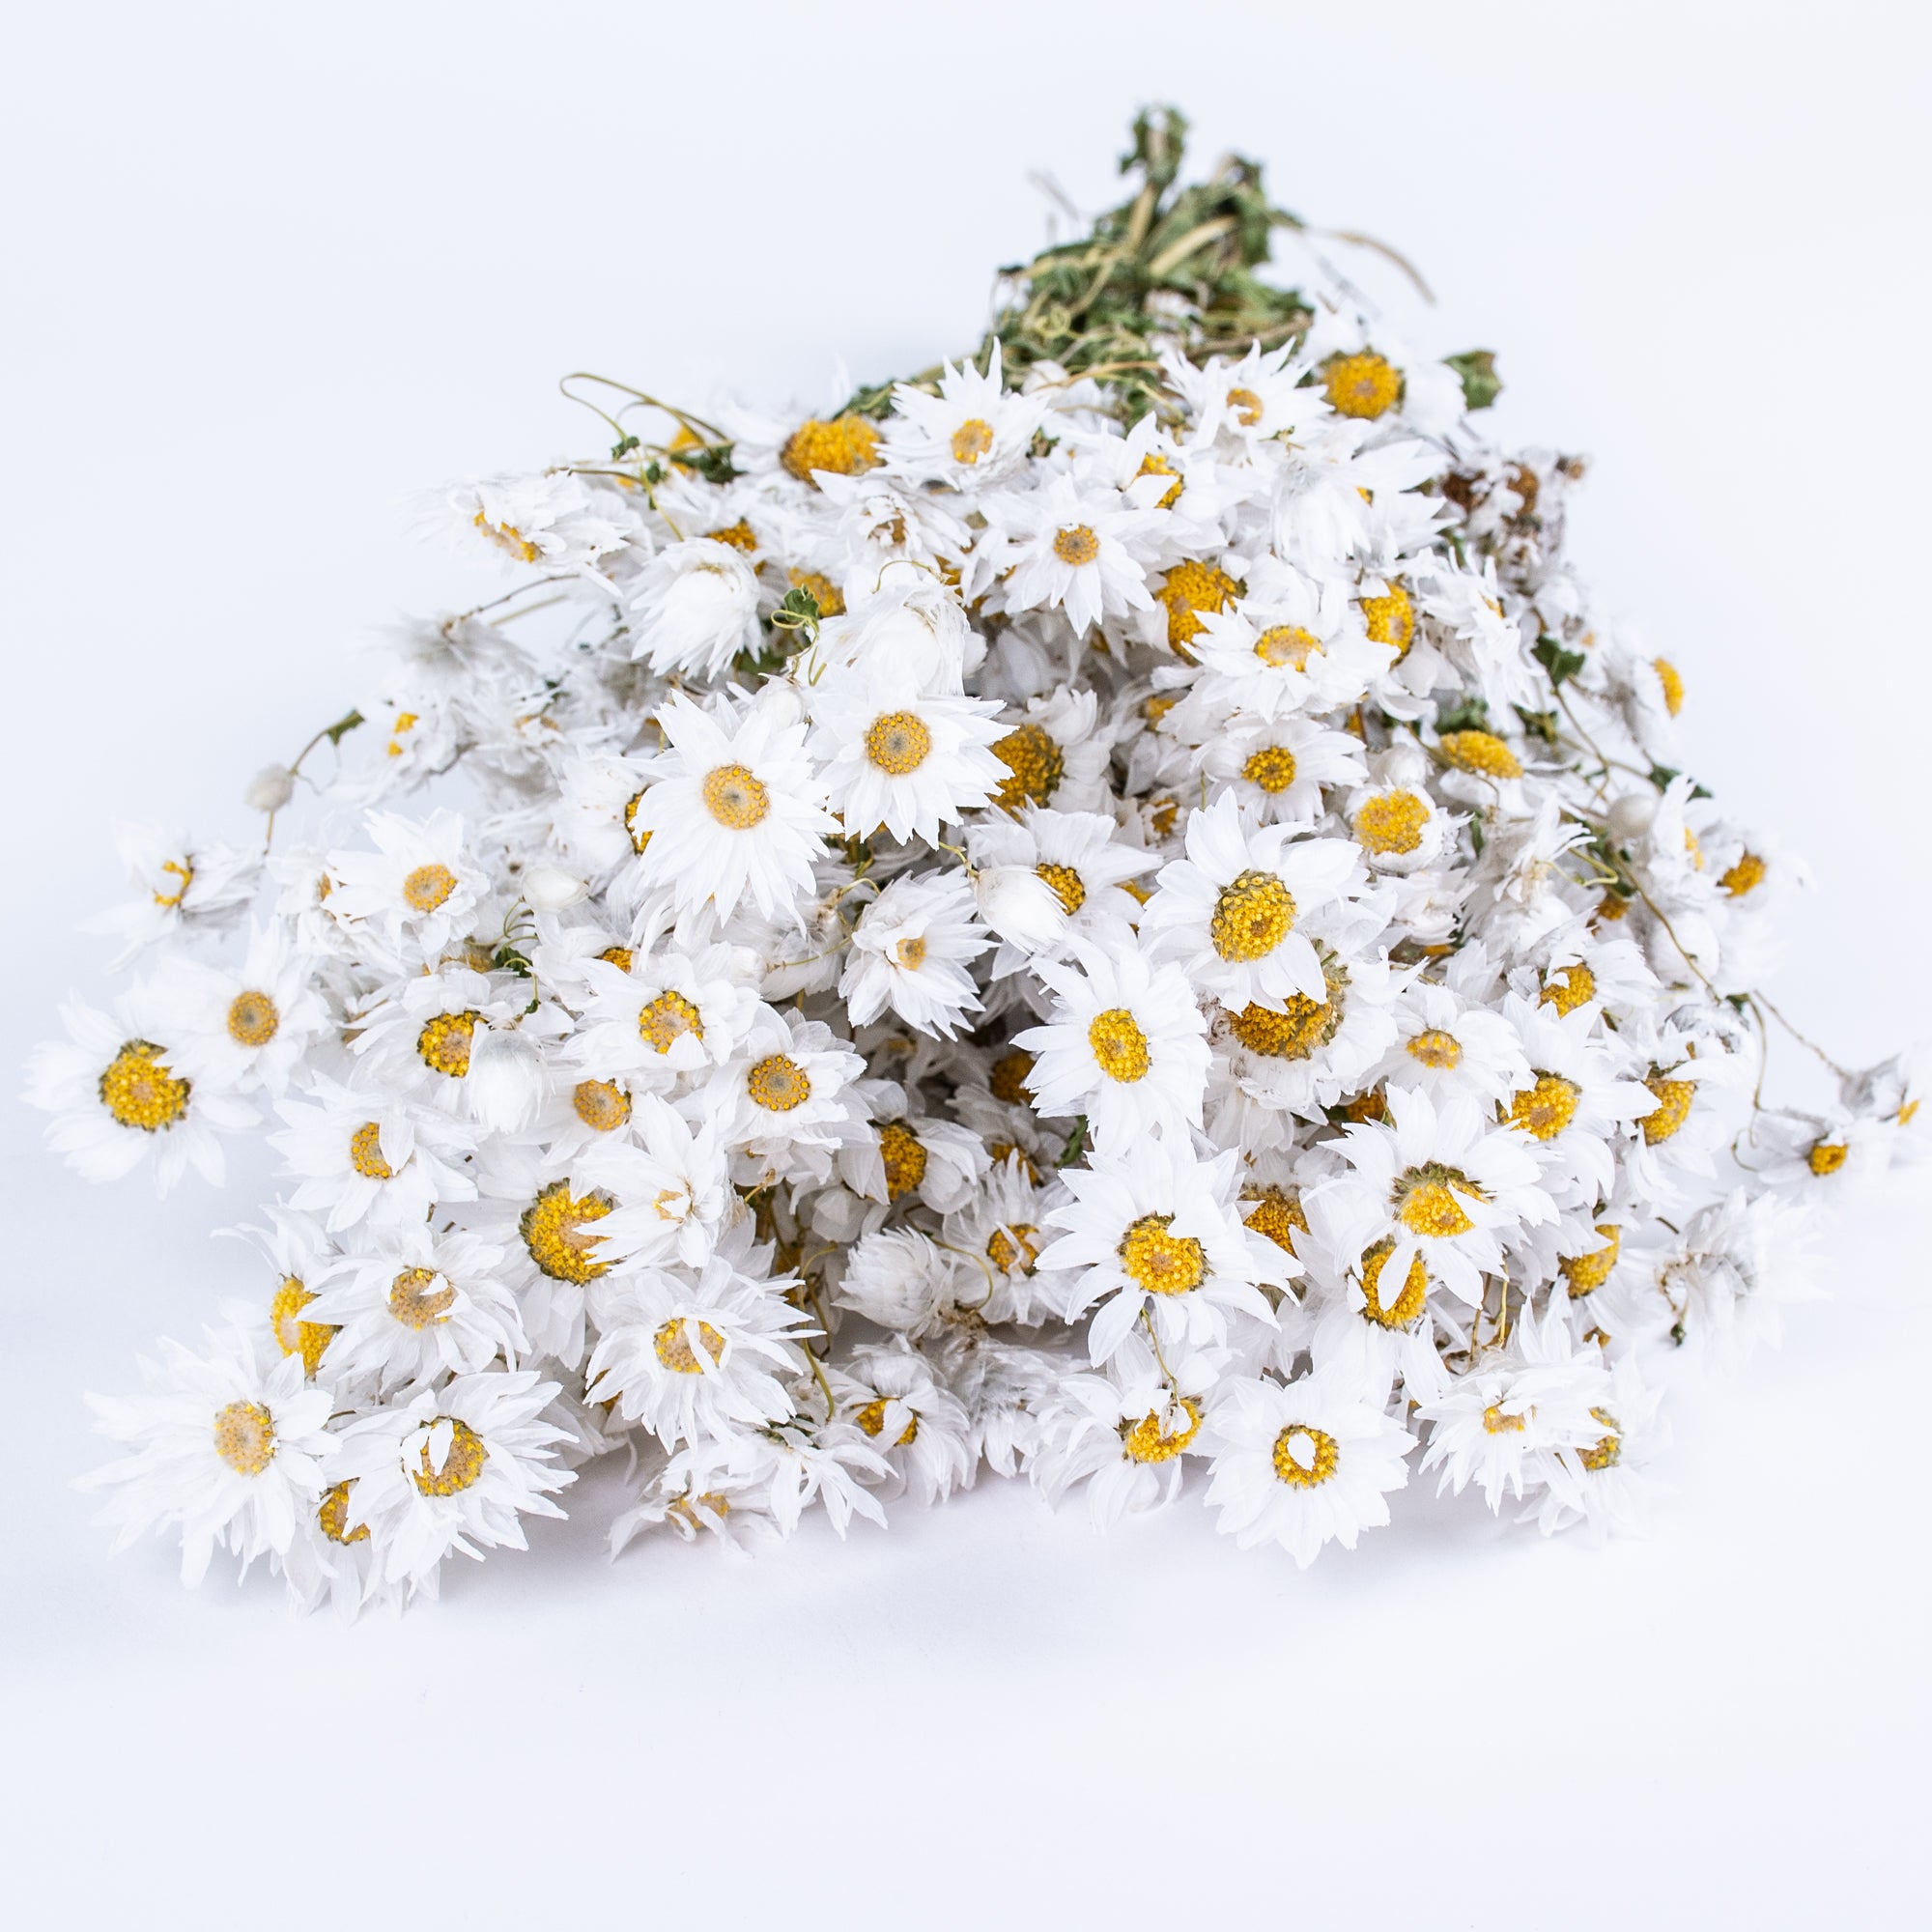 This image shows a bunch of white rodanthe flowers laid on a white background